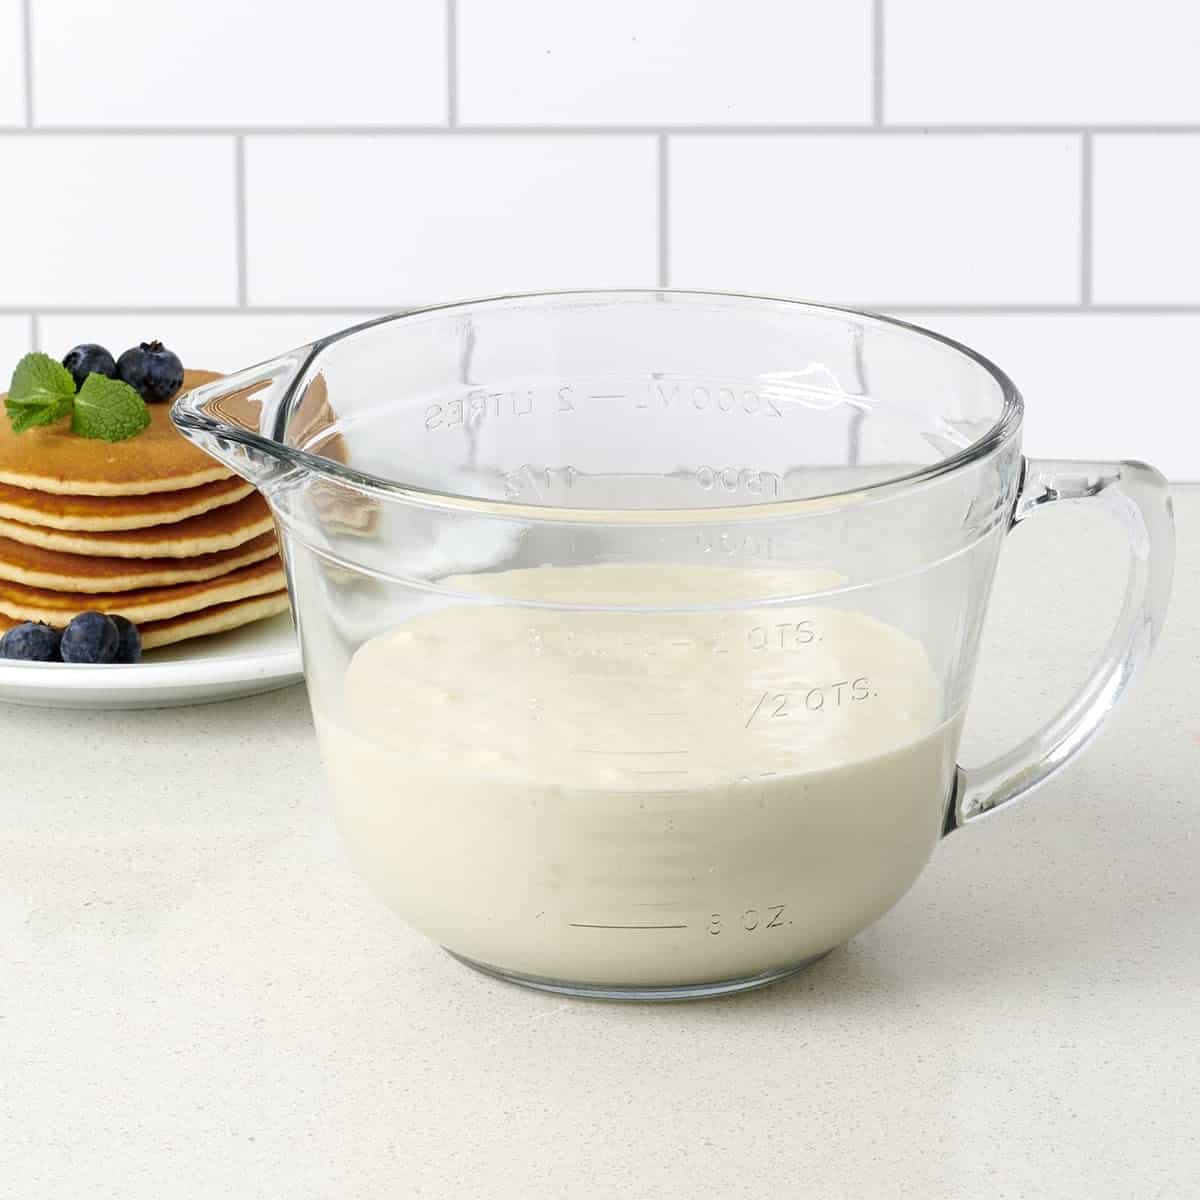 Glass food storage container filled with pancake batter that serves as a mixing bowl and measuring cup too!